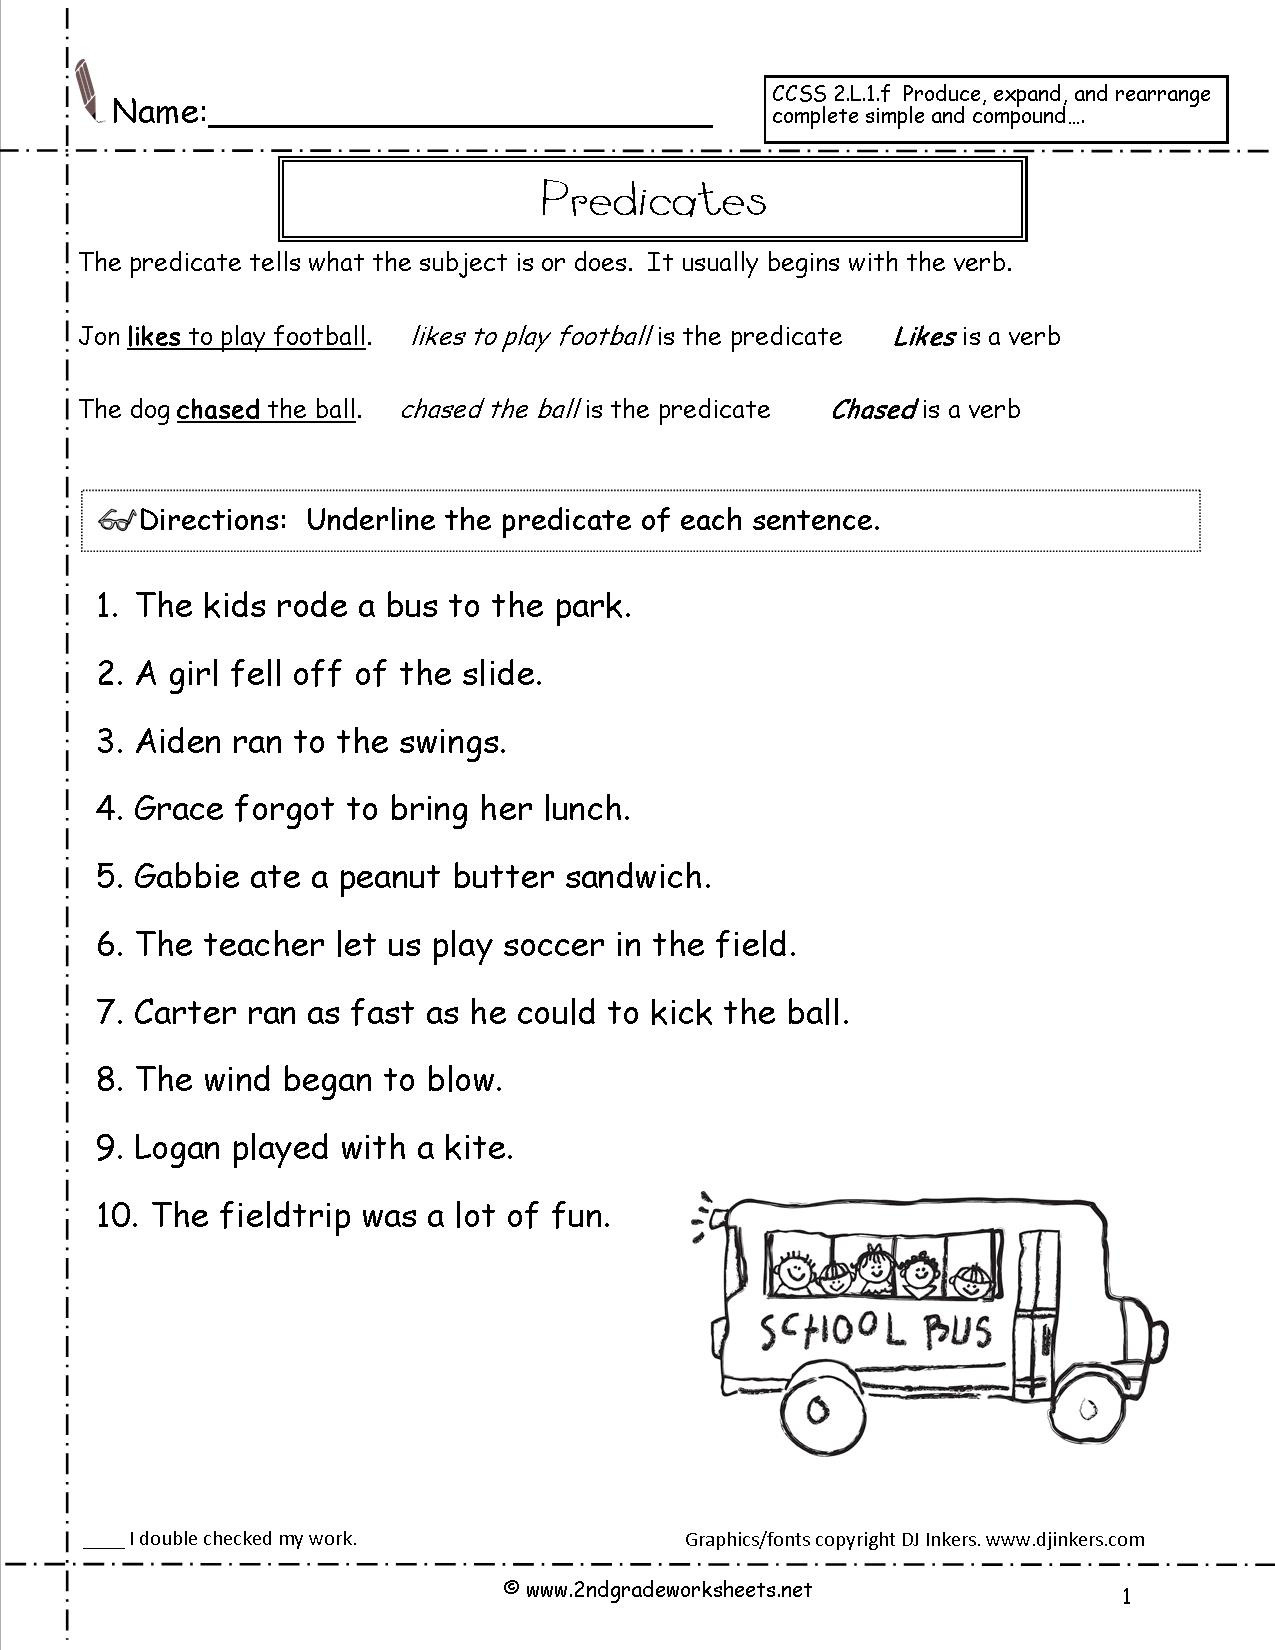 simple-and-complete-subject-worksheets